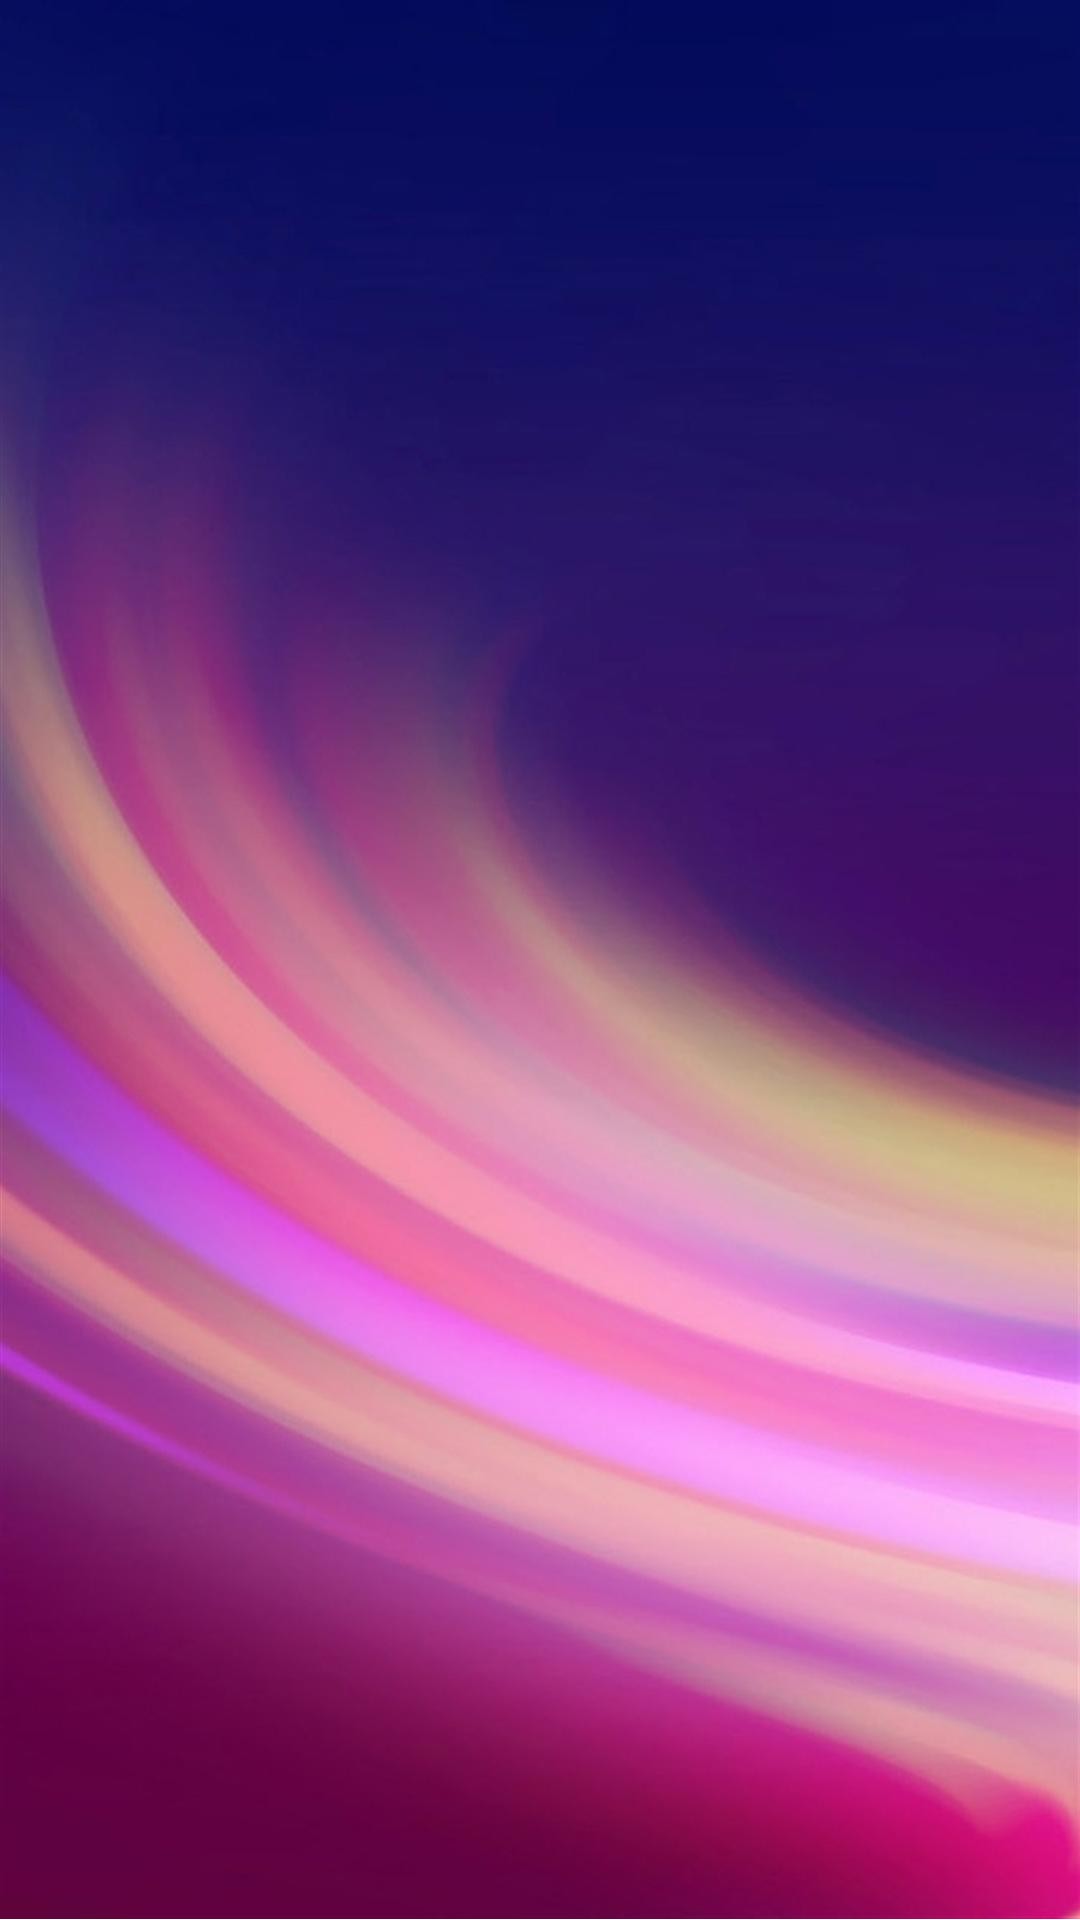 Abstract Purple Brush Waves iPhone 6 Plus HD Wallpaper